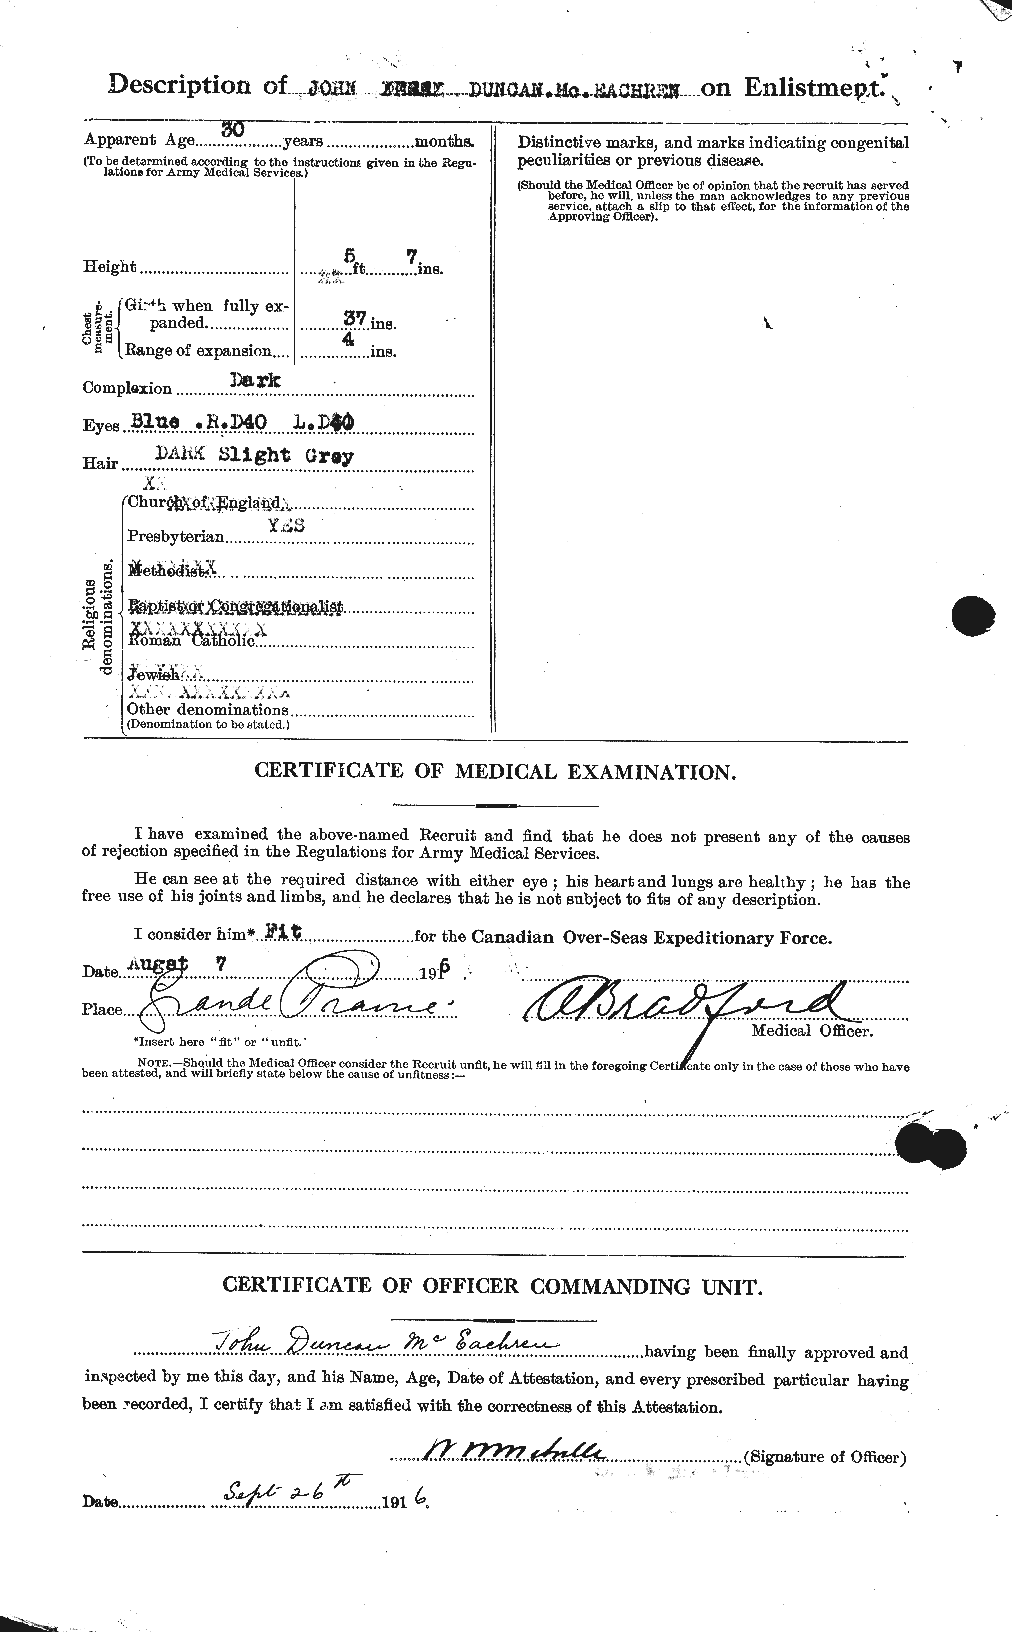 Personnel Records of the First World War - CEF 520883b